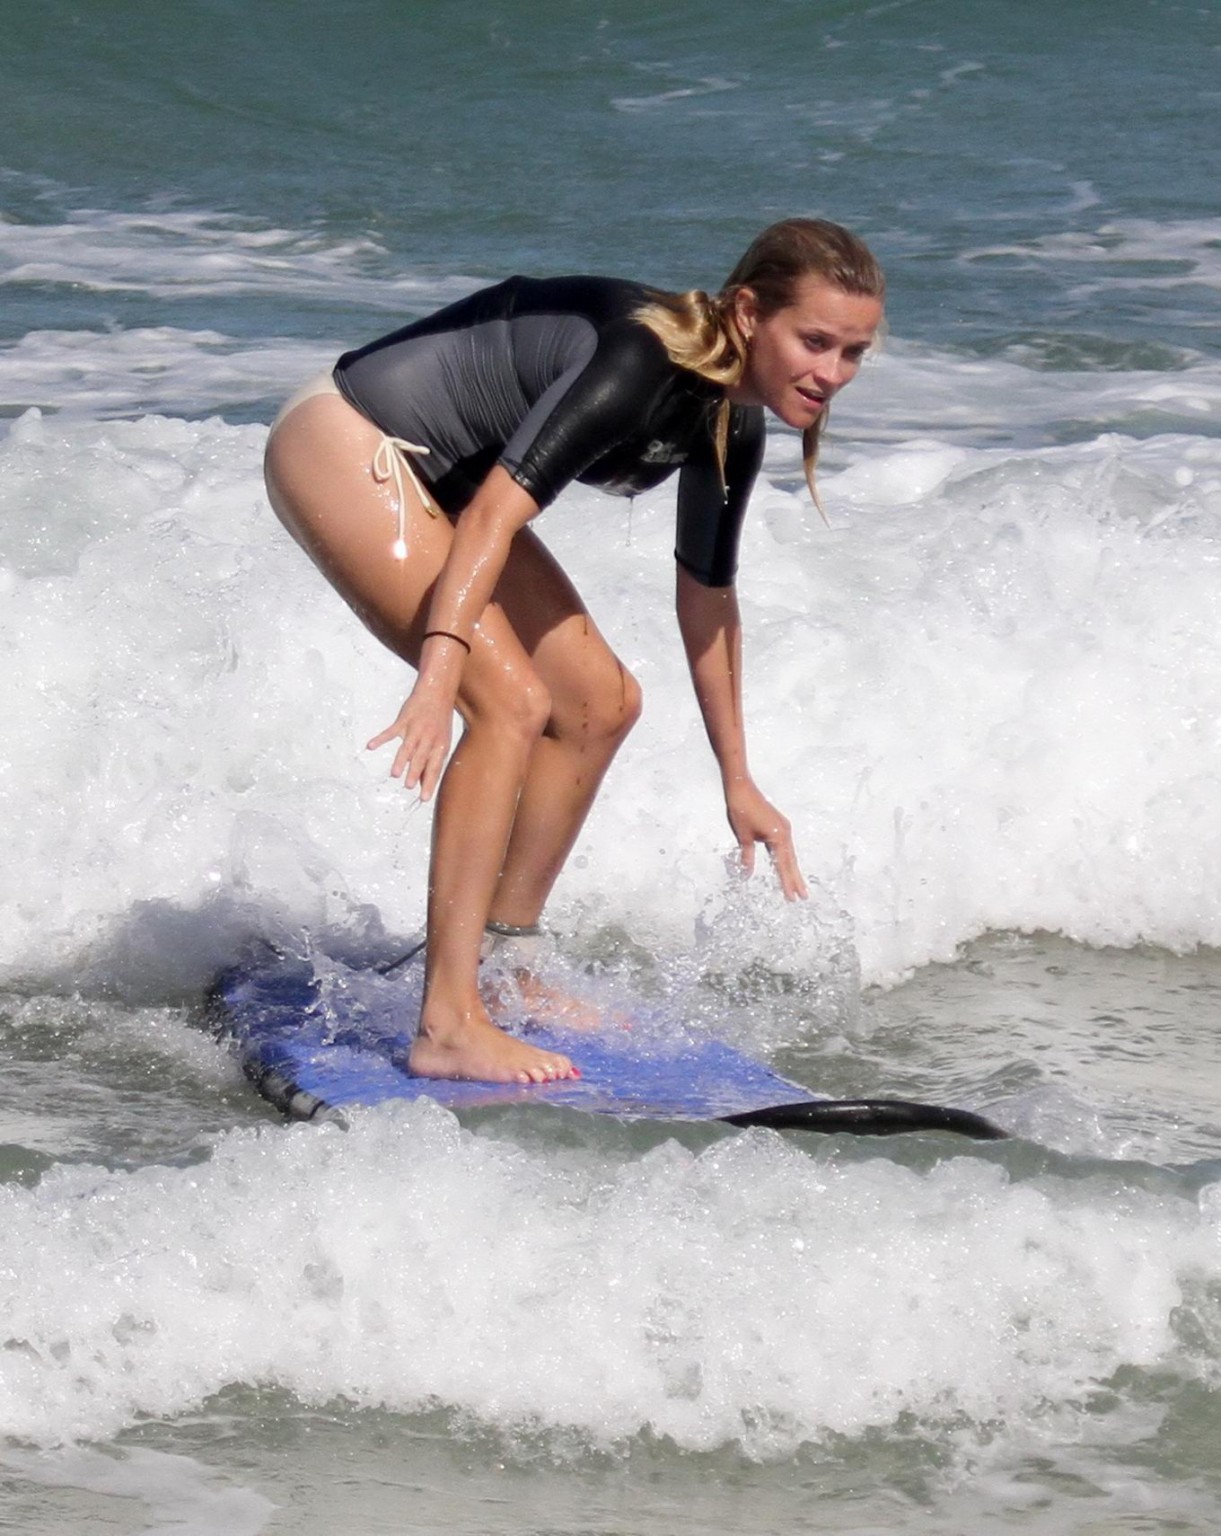 Reese Witherspoon shows off her ass while surfing in Hawaii #75291194